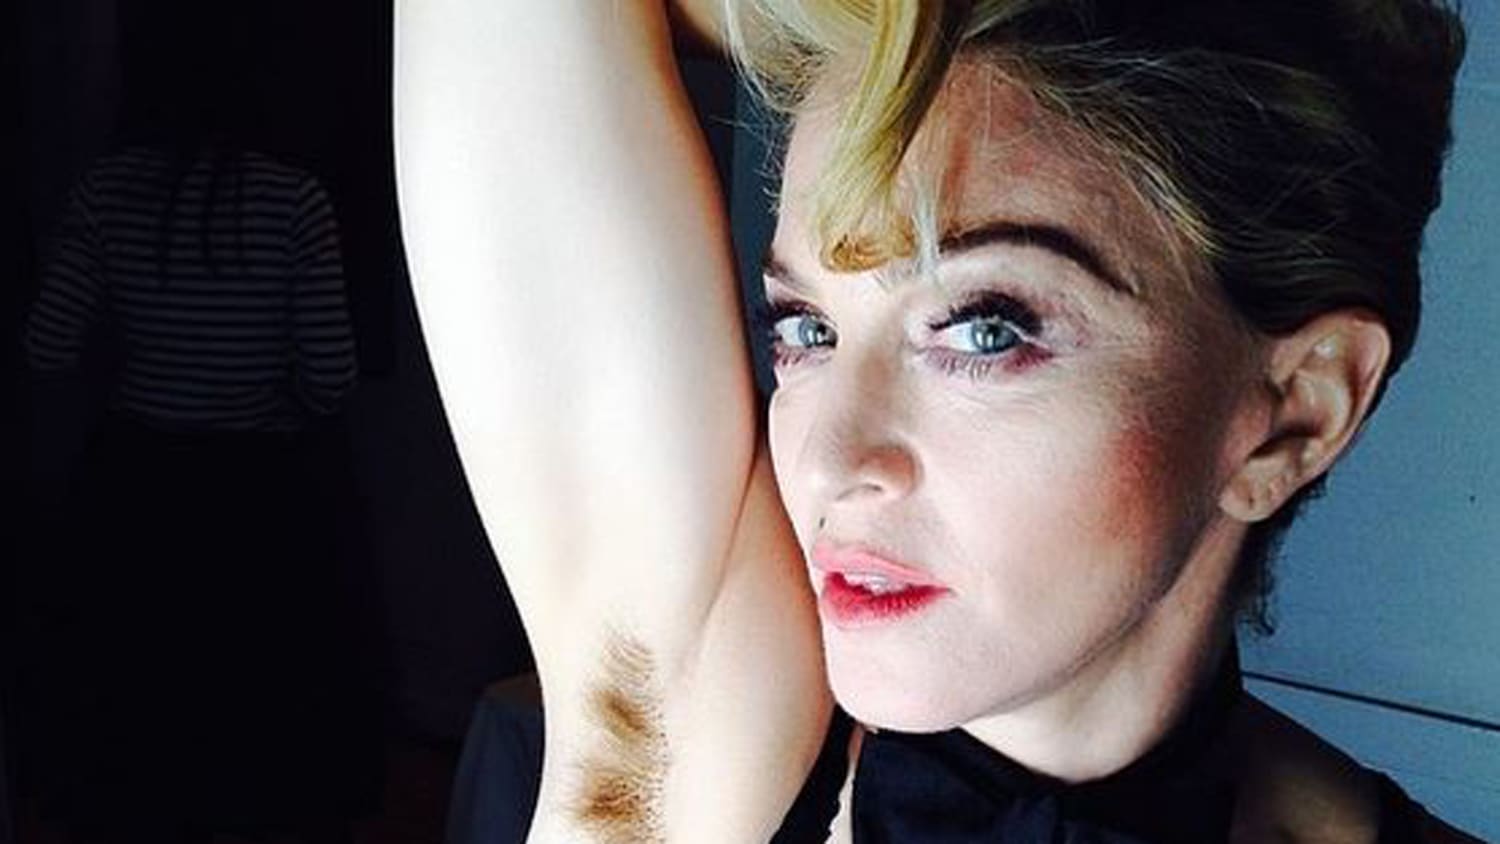 Everything You Need To Know About The Armpit Hair Movement